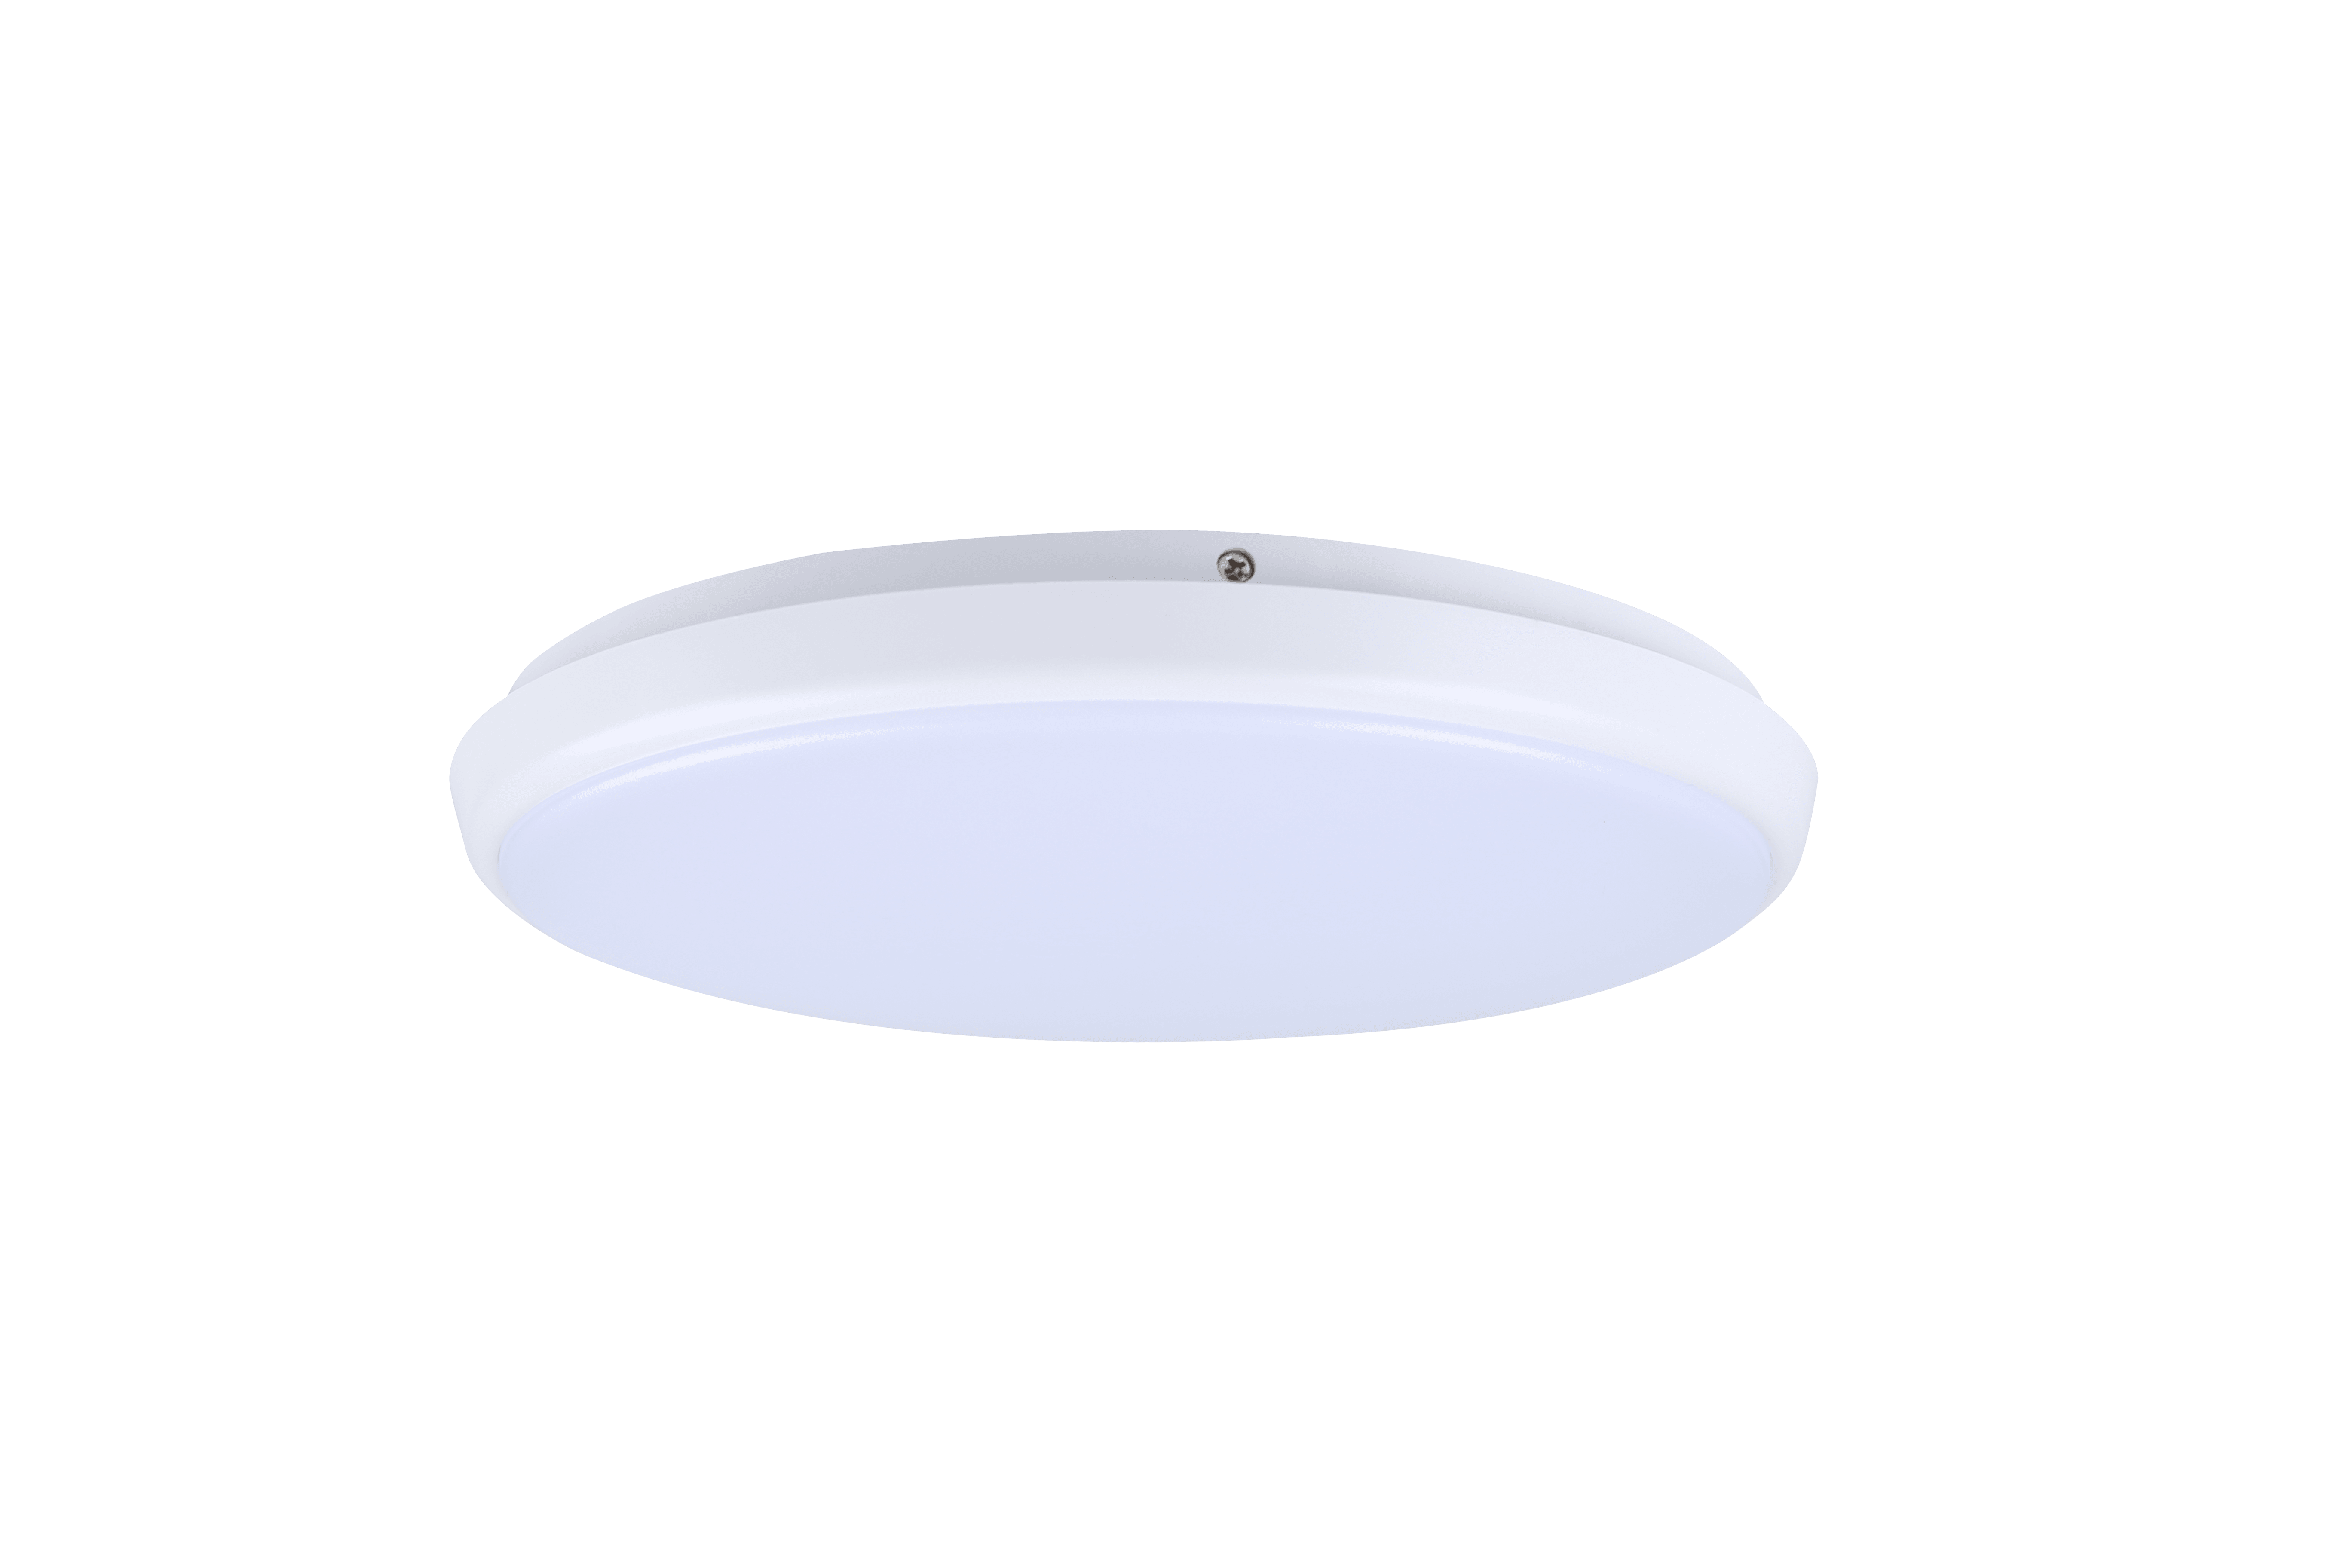 Unbranded Oyster Lights White 15W slimline oyster-dimmable with beautiful looks Lights-For-You LED1083WHA11/CCT